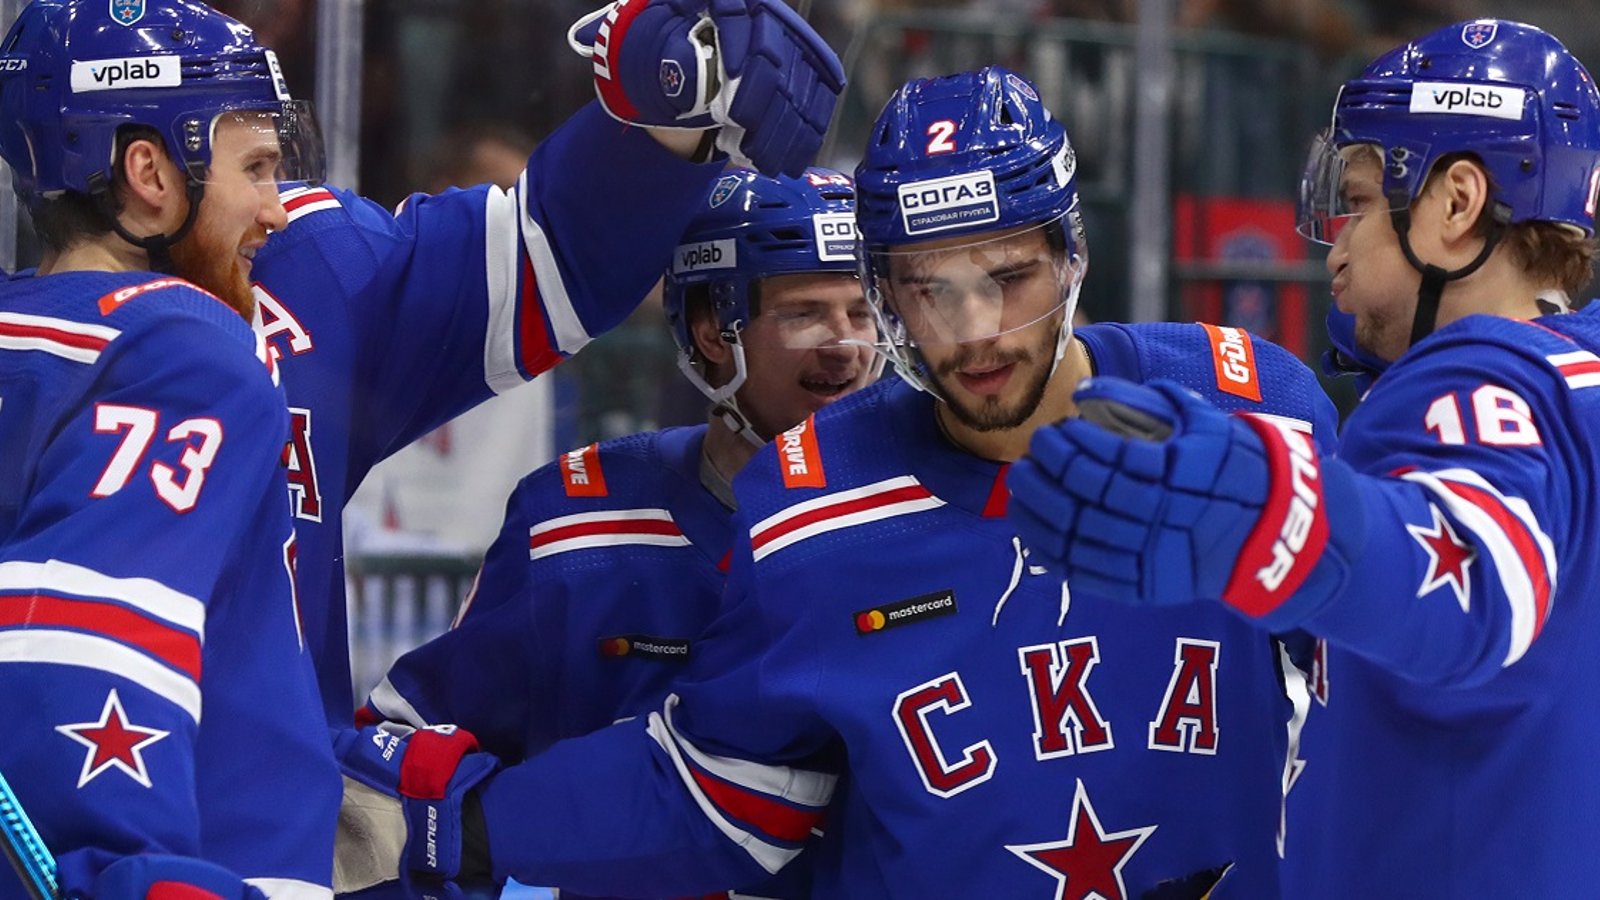 Rumor: Gold Medalist Artyom Zub has committed to an NHL team.